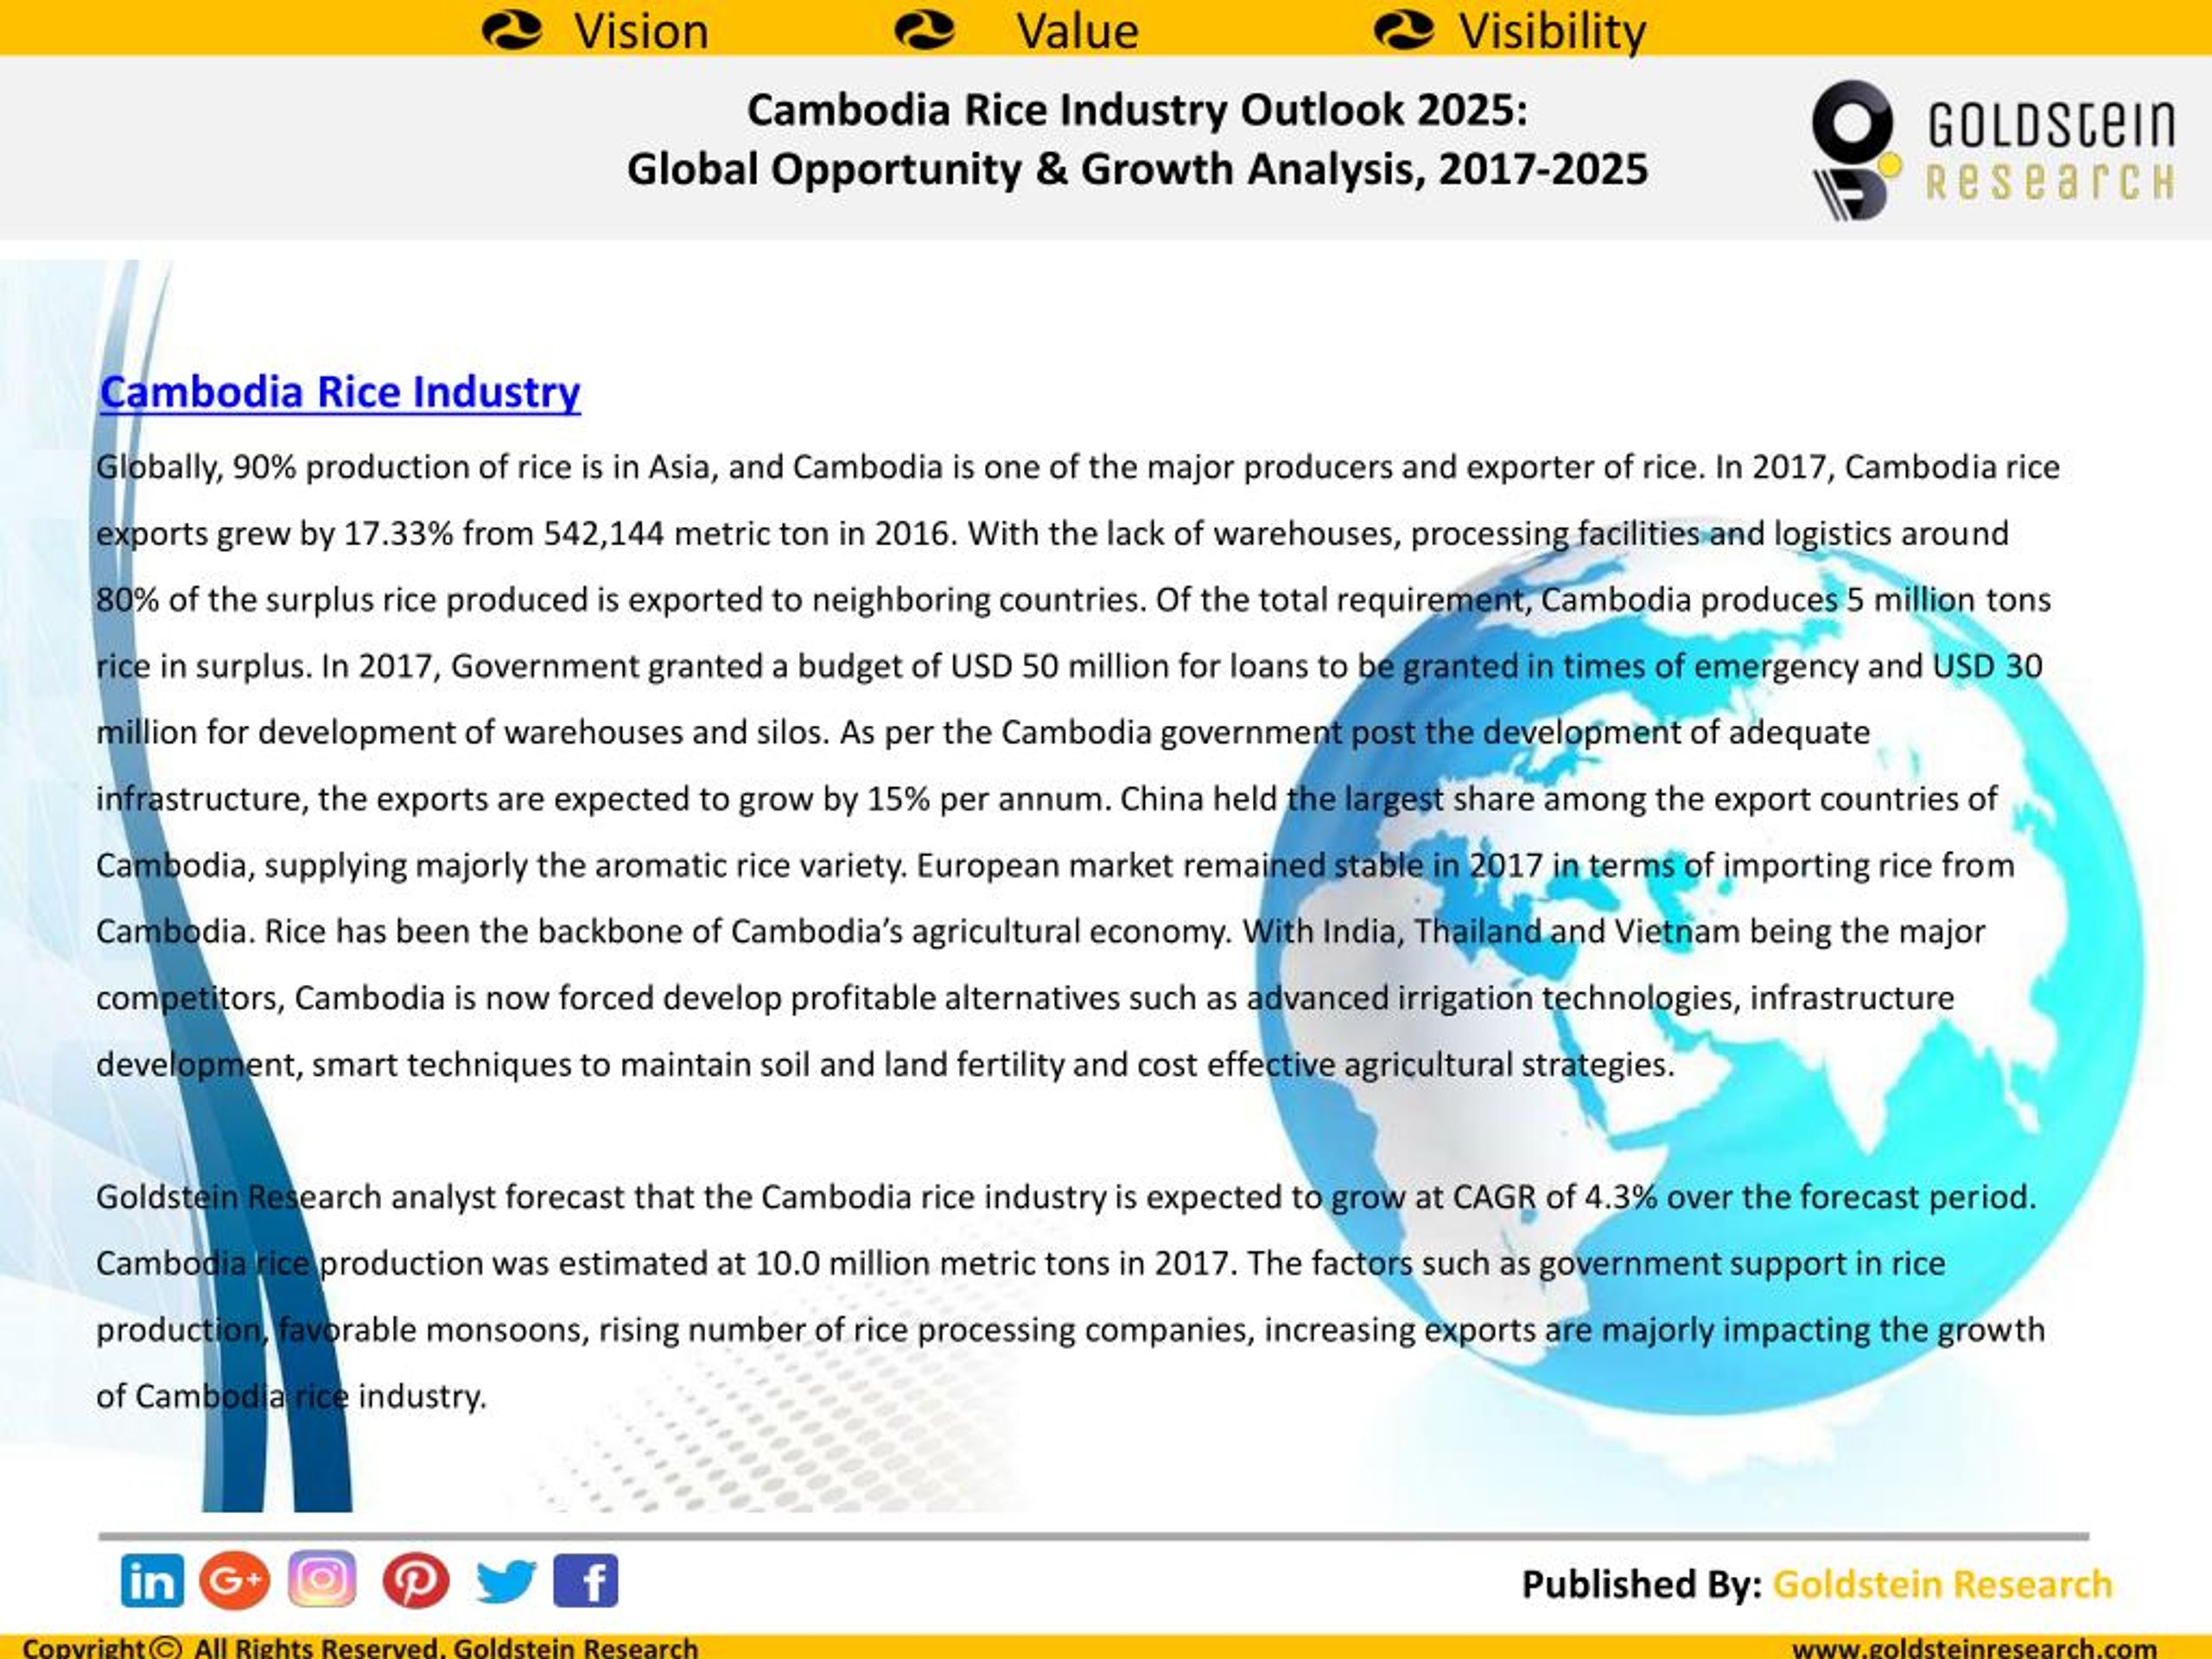 PPT Cambodia Rice Industry Outlook 2025 Global Opportunity & Growth